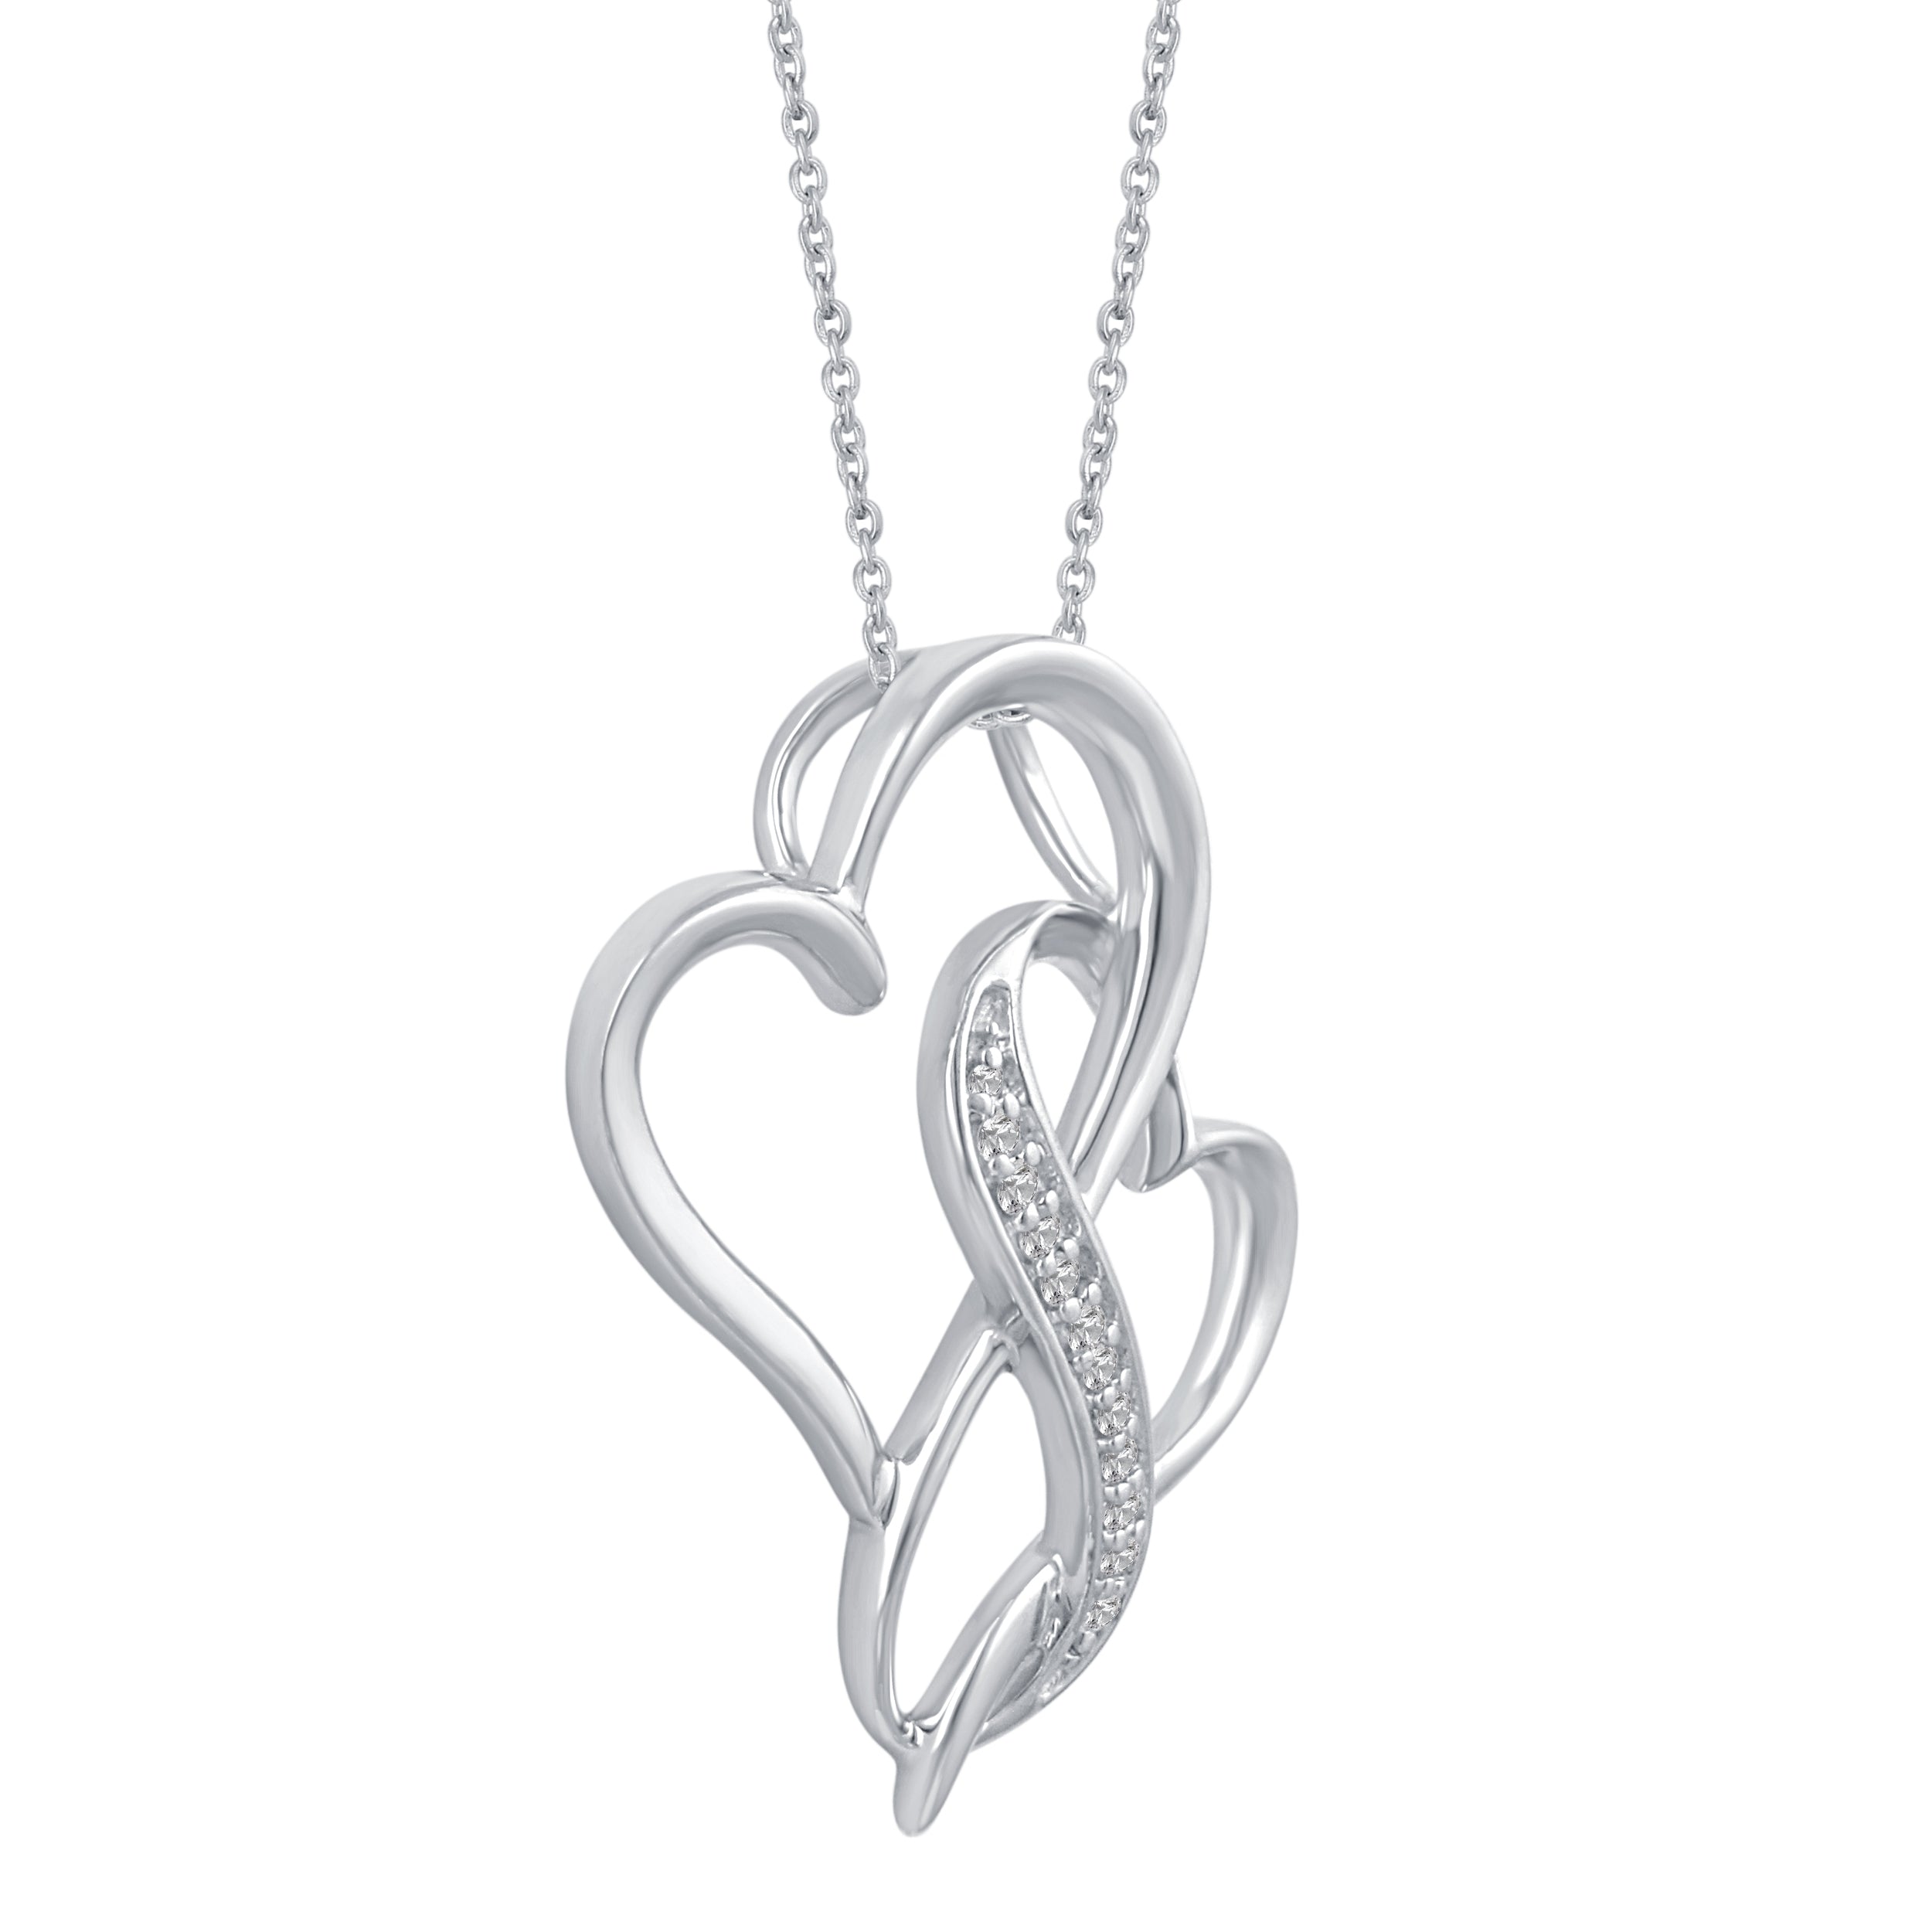 GIVA AVNI 925 Oxidised Silver Entwined Heart Pendant | Valentines Gift for  Girlfriend, Gifts for Women and Girls |With Certificate of Authenticity and  925 Stamp | 6 Month Warranty* : Amazon.in: Fashion